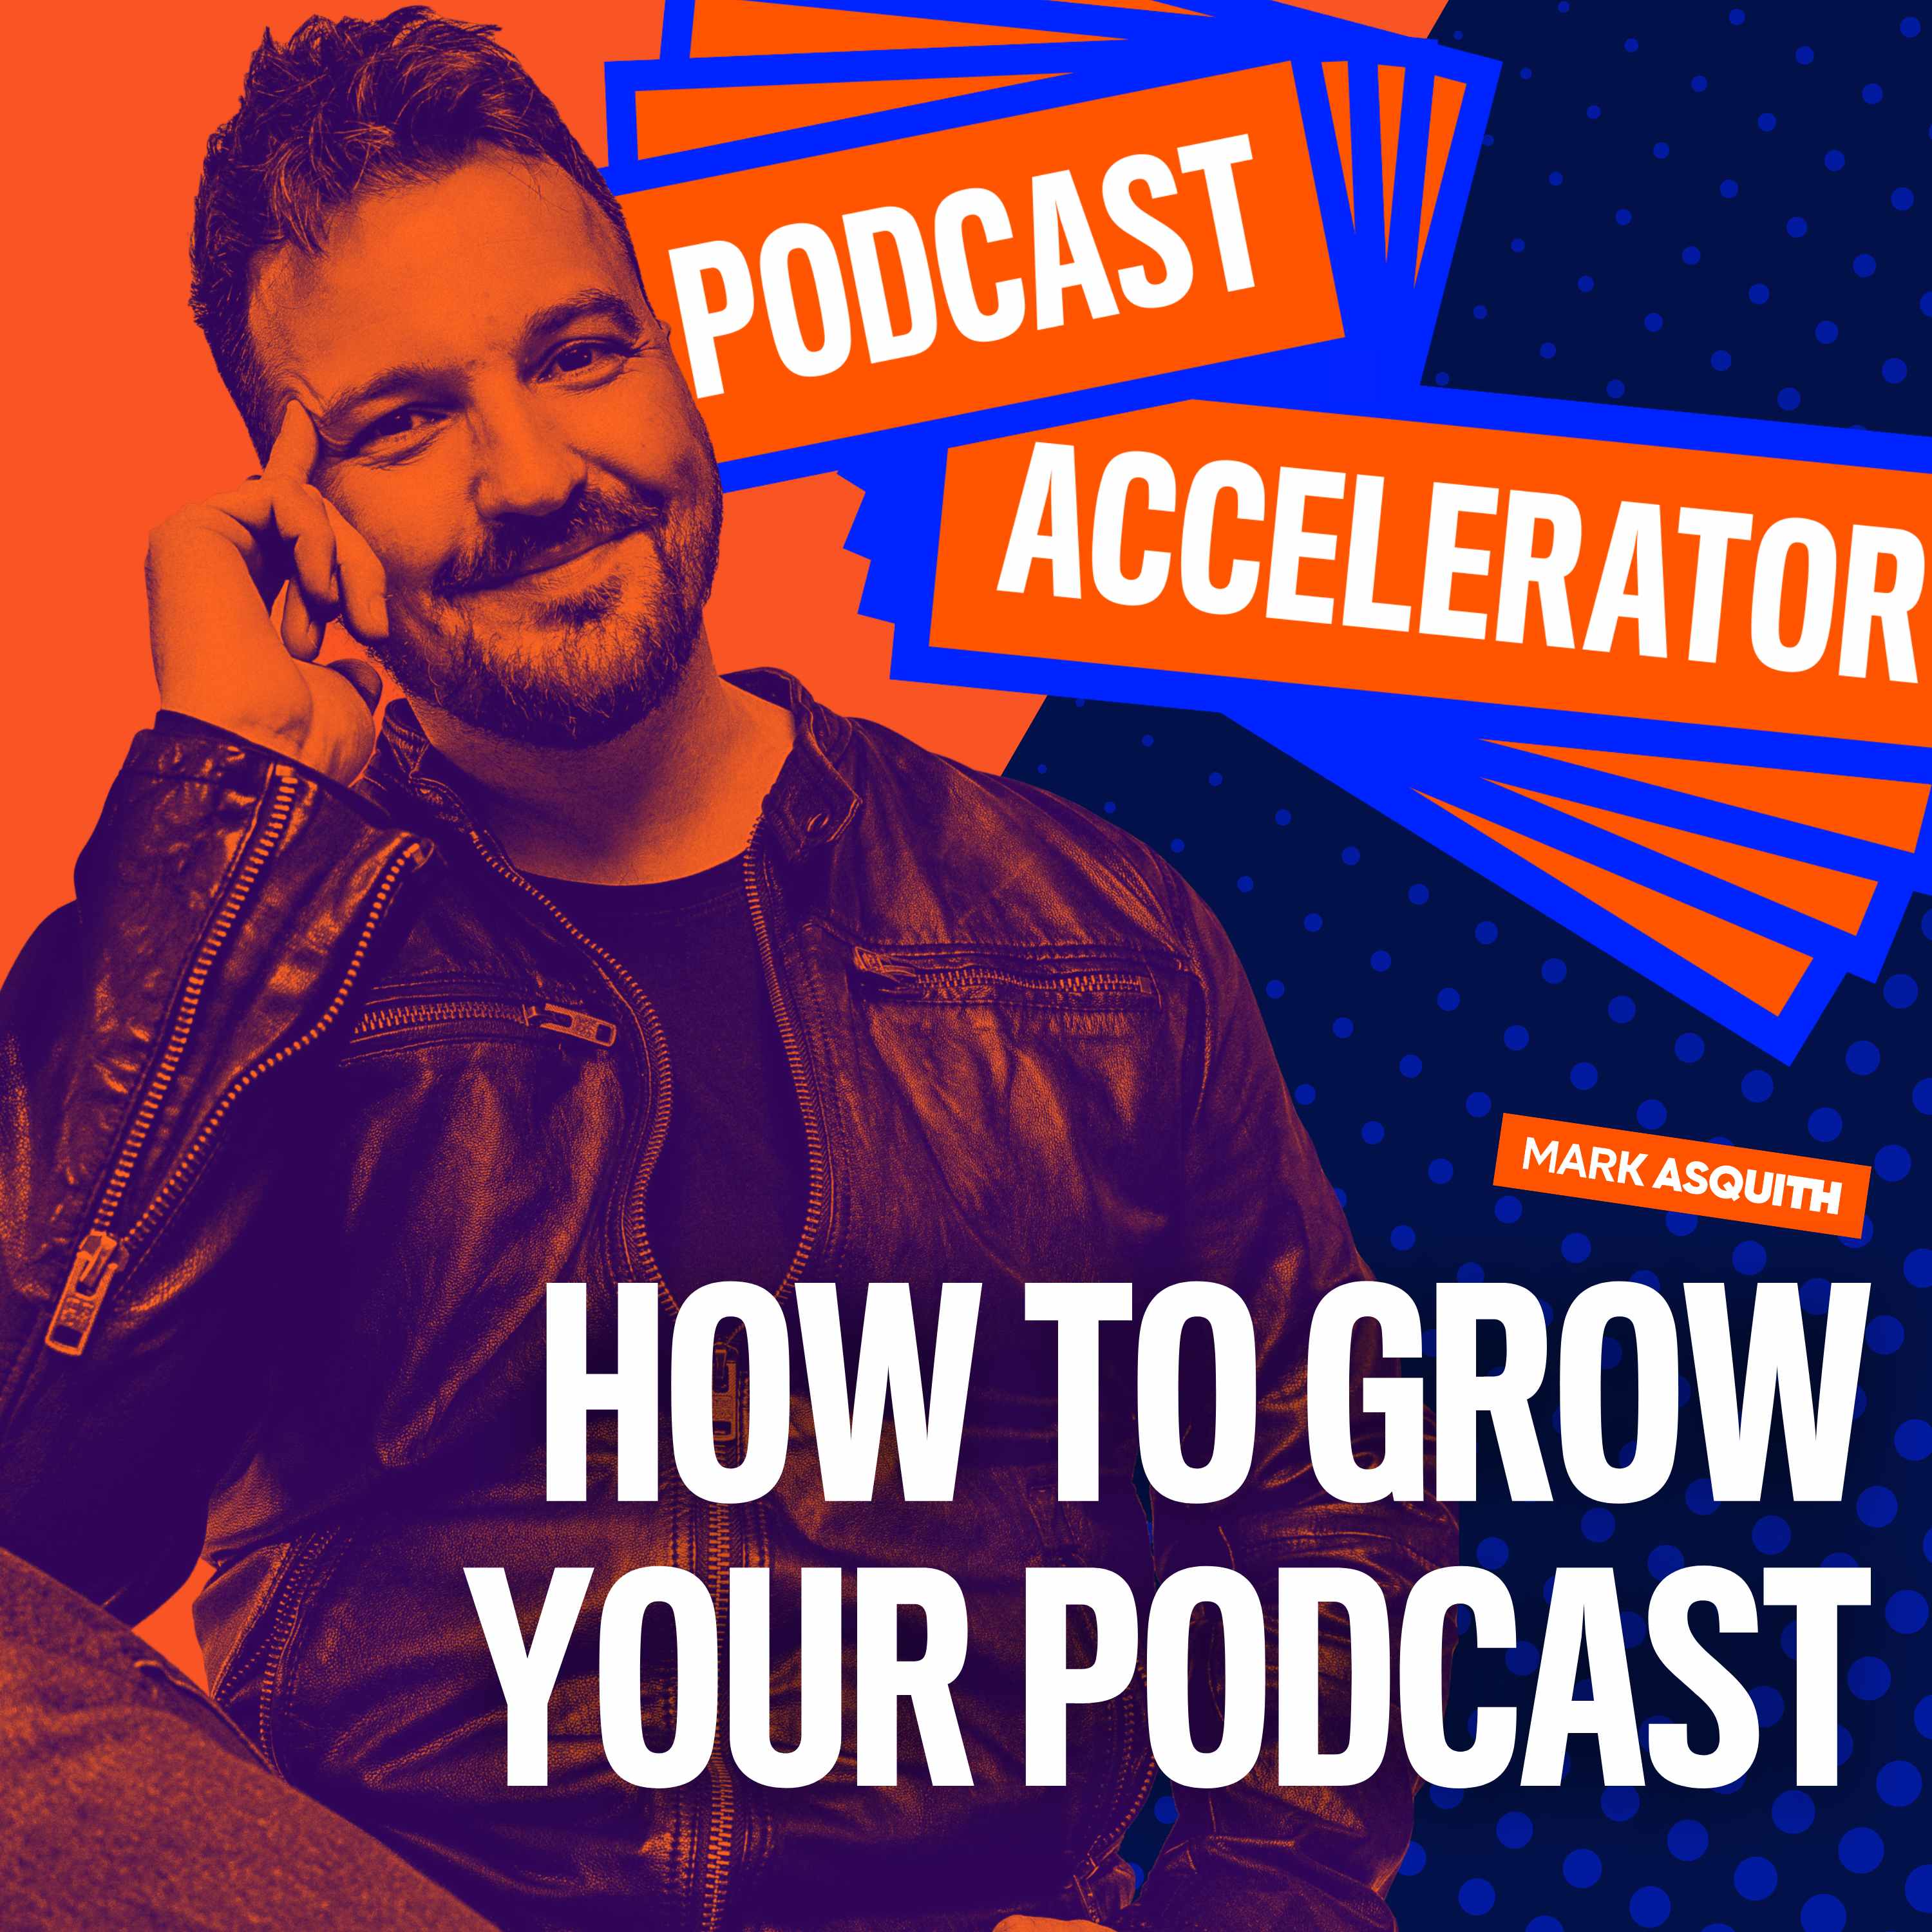 Artwork for The Podcast Accelerator, Learn How to Grow Your Podcast